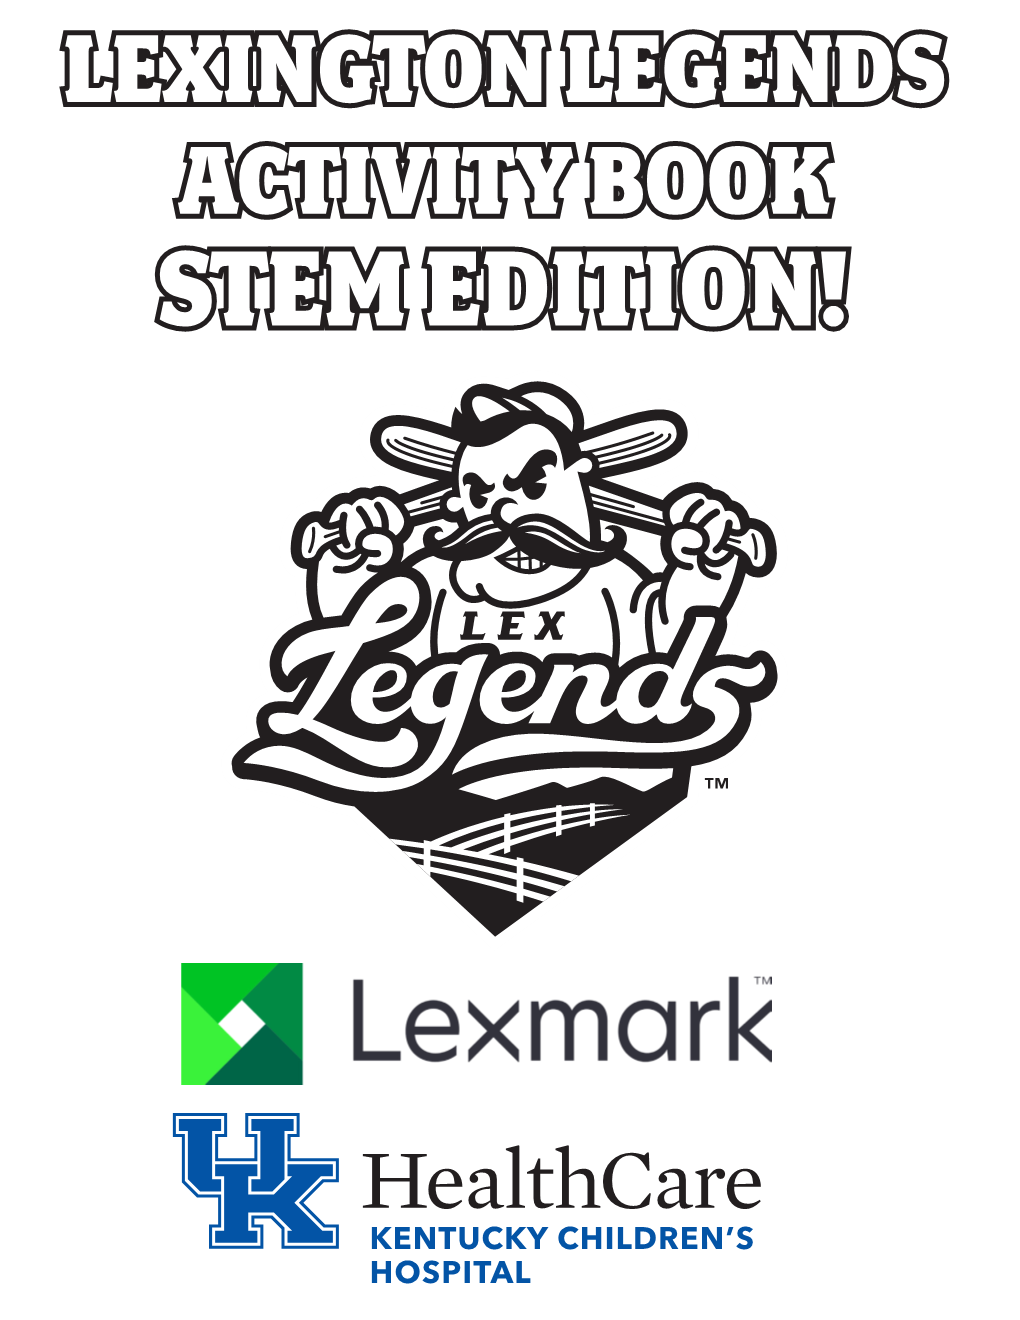 Lexington Legends Activity Book Stem Edition! First, Let’S Start out with Some Fun Stem Facts About Baseball!